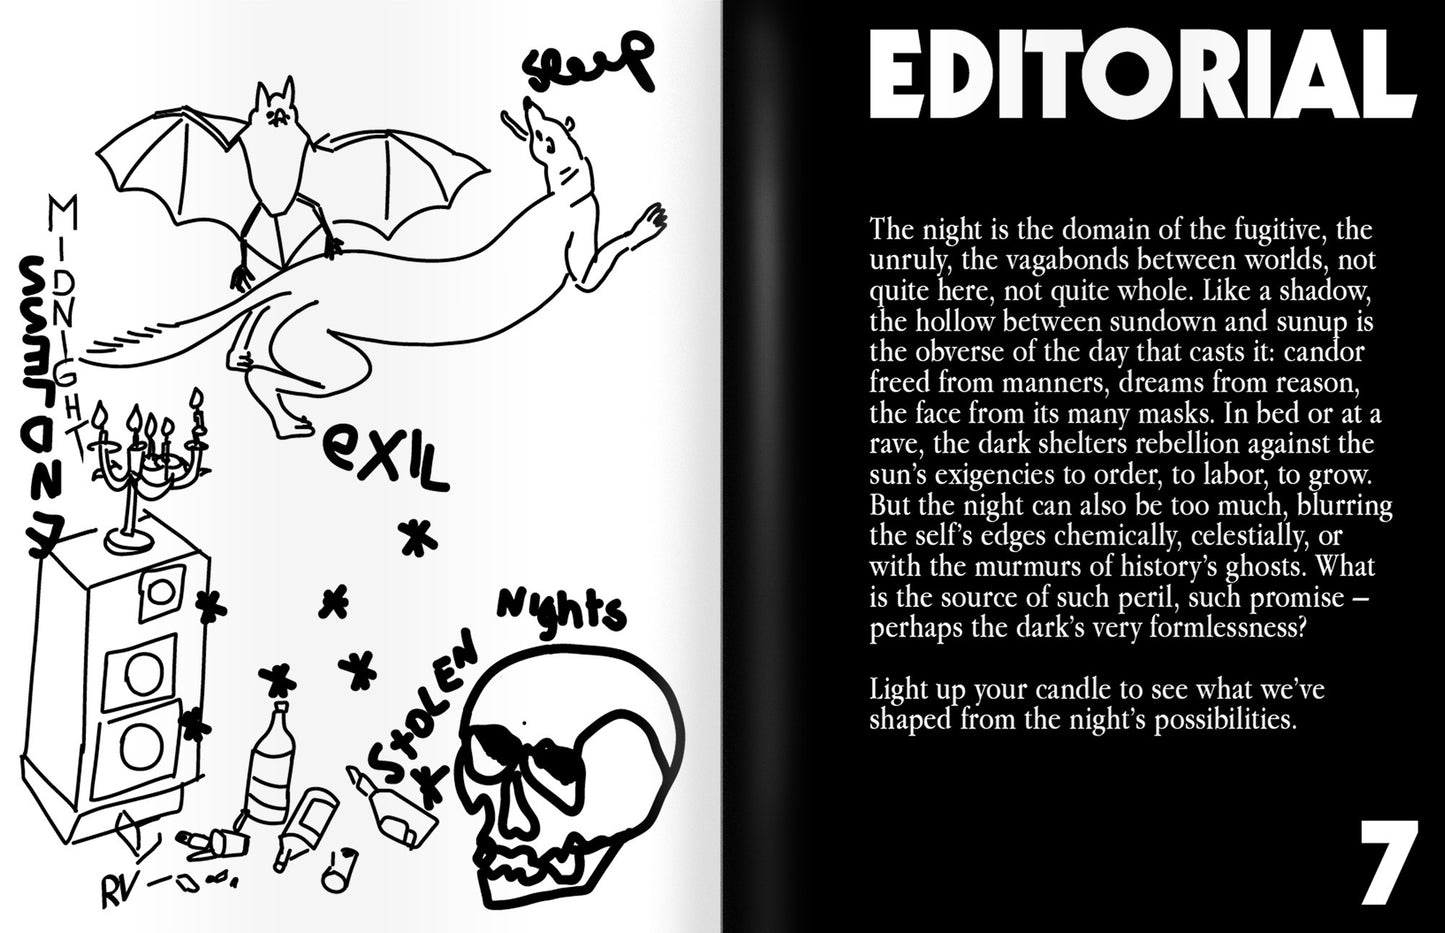 Spike ePaper (Issue 78): The Night